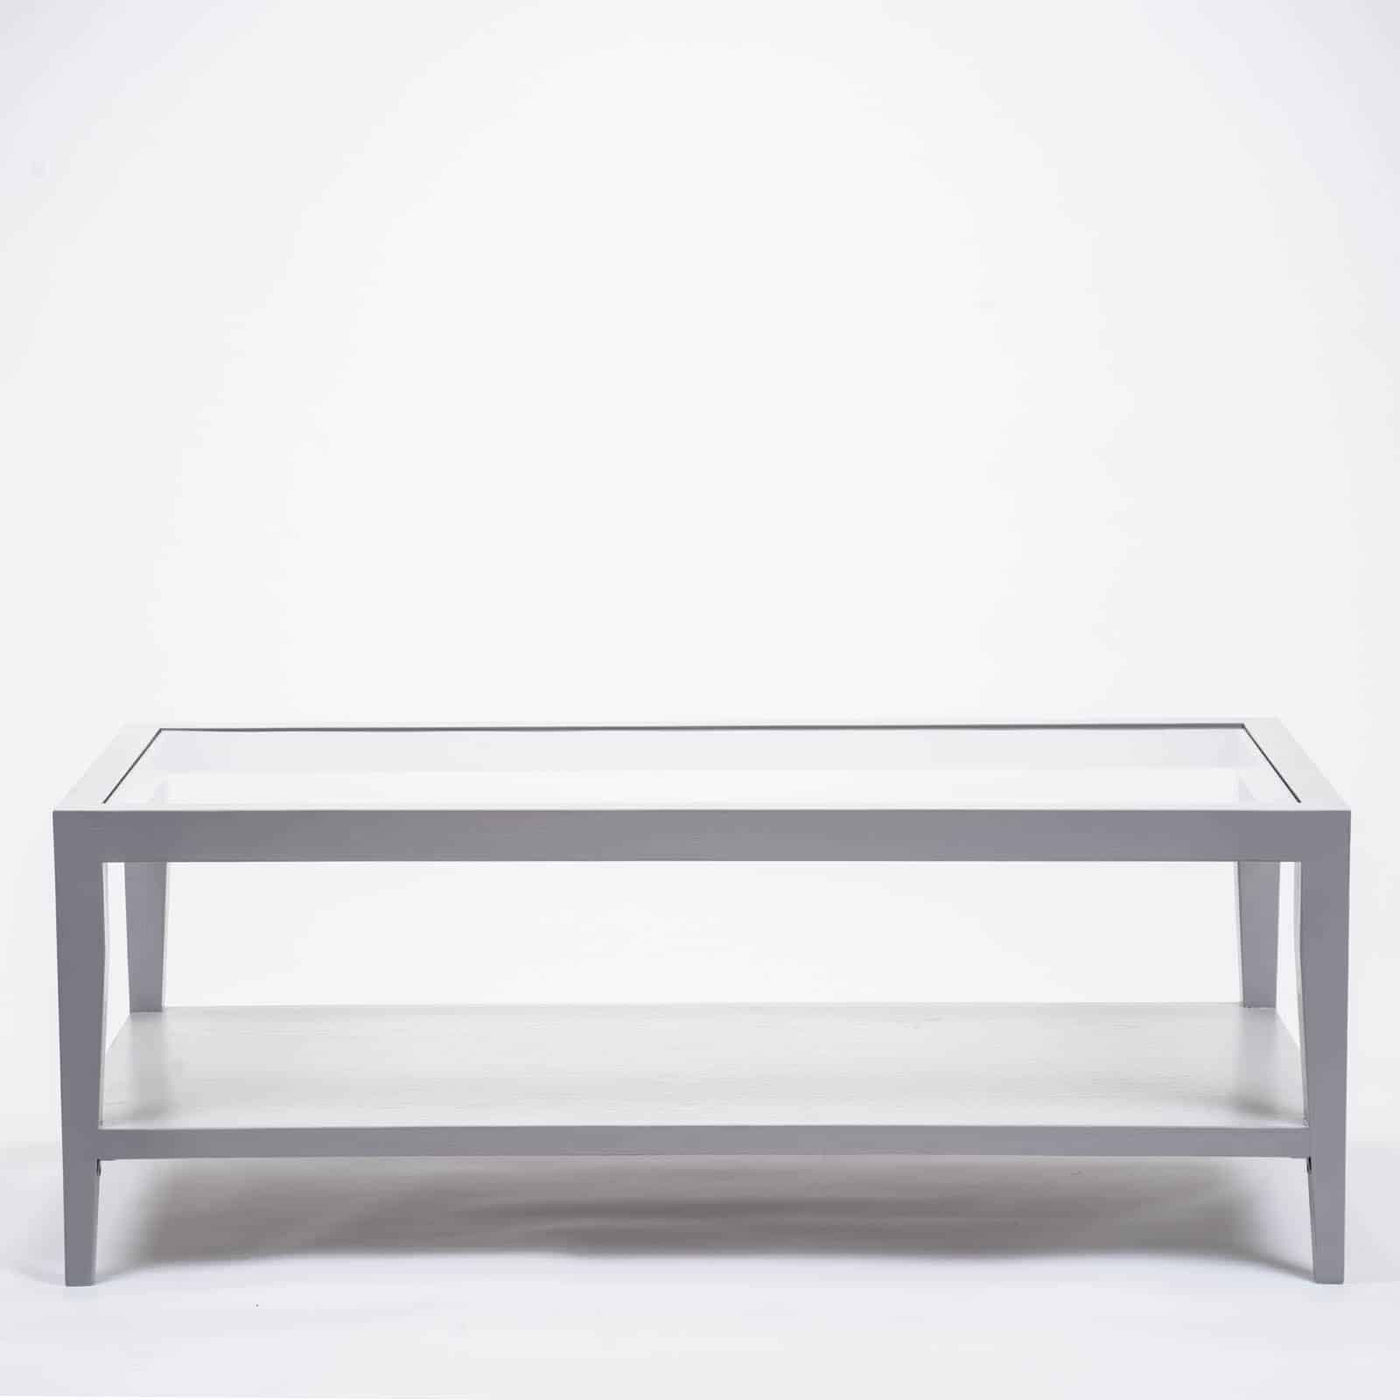 Cheriton Coffee Table - Grey by D.I. Designs